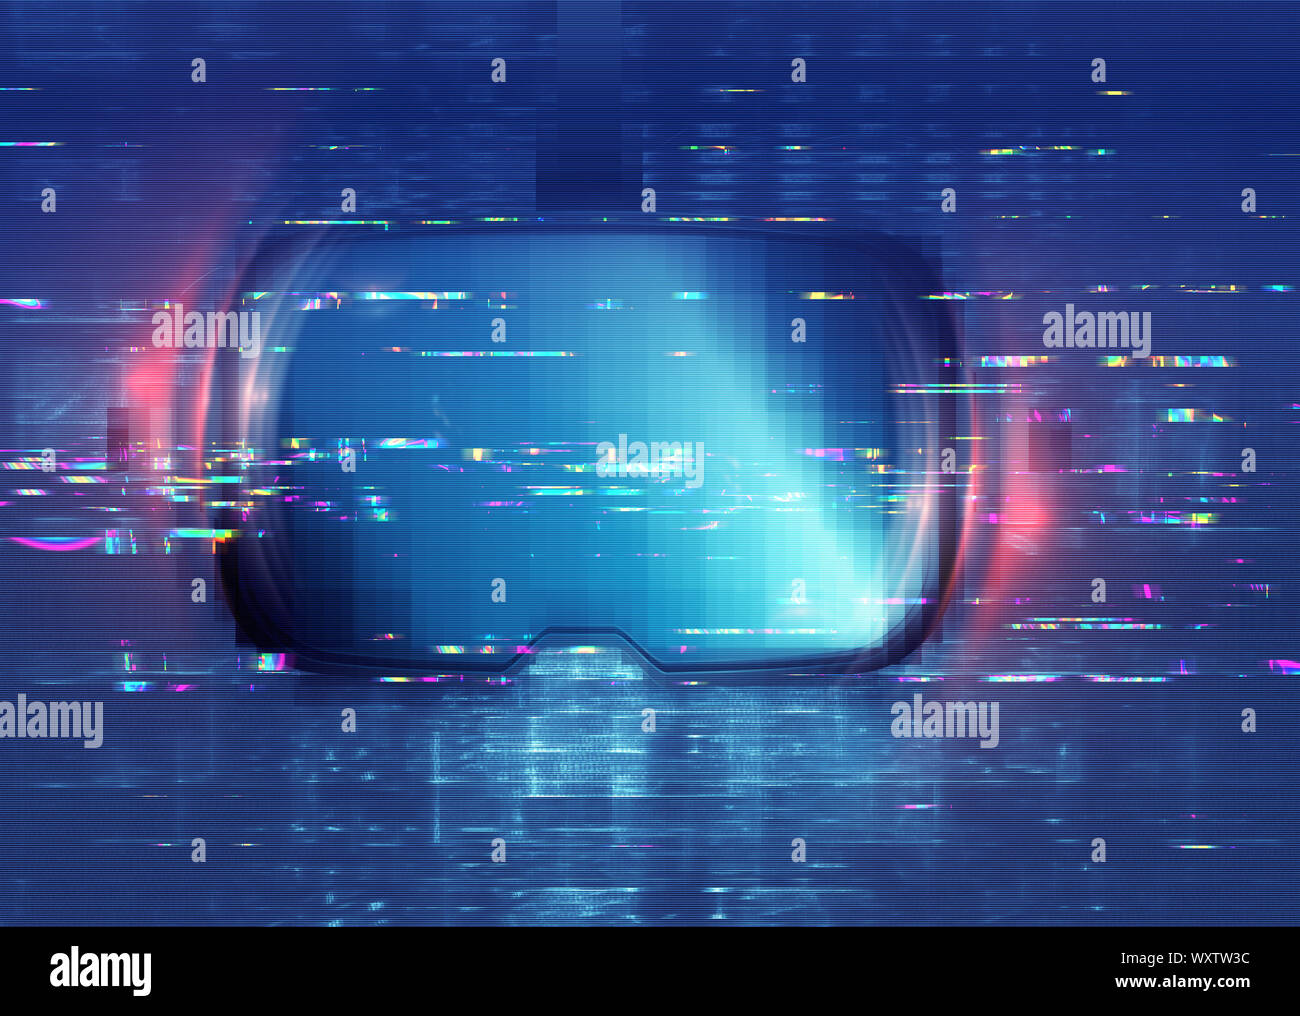 Download Glitch Texture High Resolution Stock Photography And Images Alamy